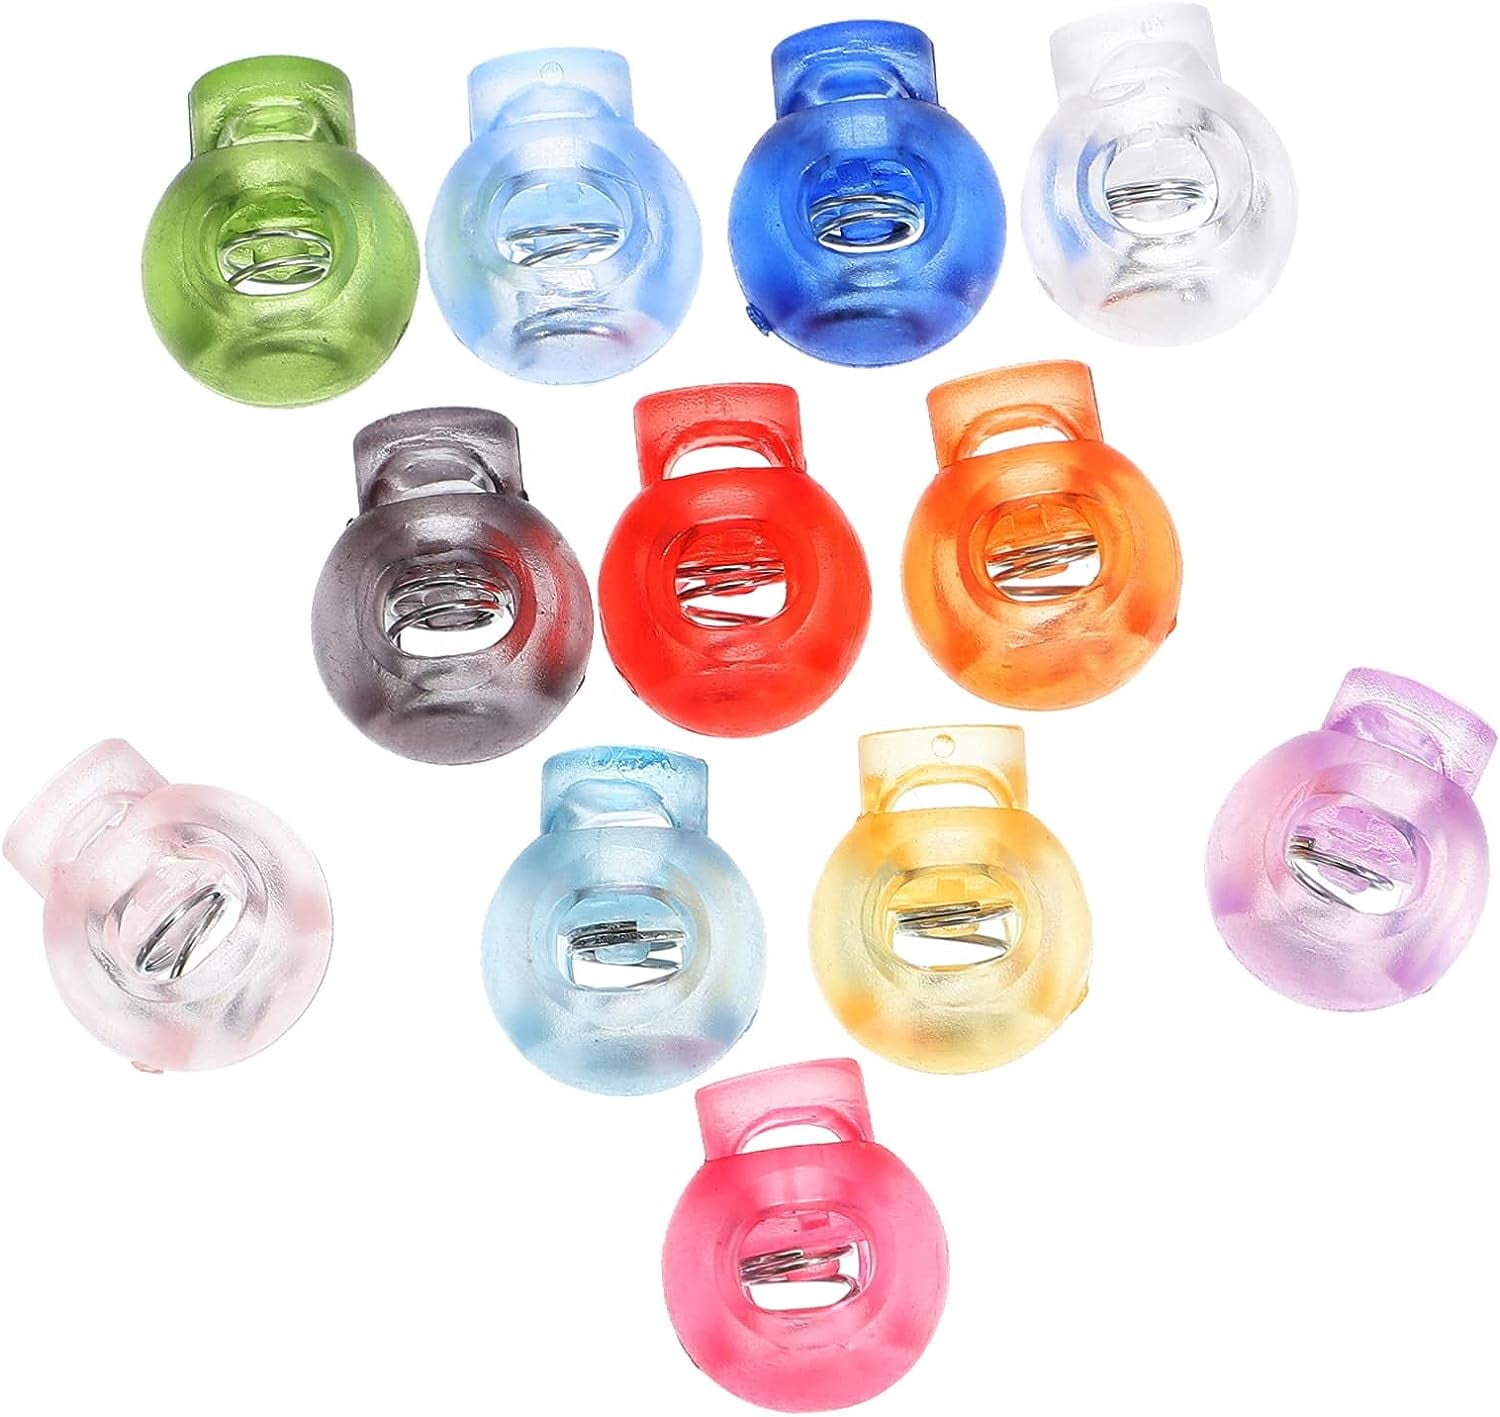 Toggles Shoe Lace End Clips Pants Rope Clasps Plastic Shoelace